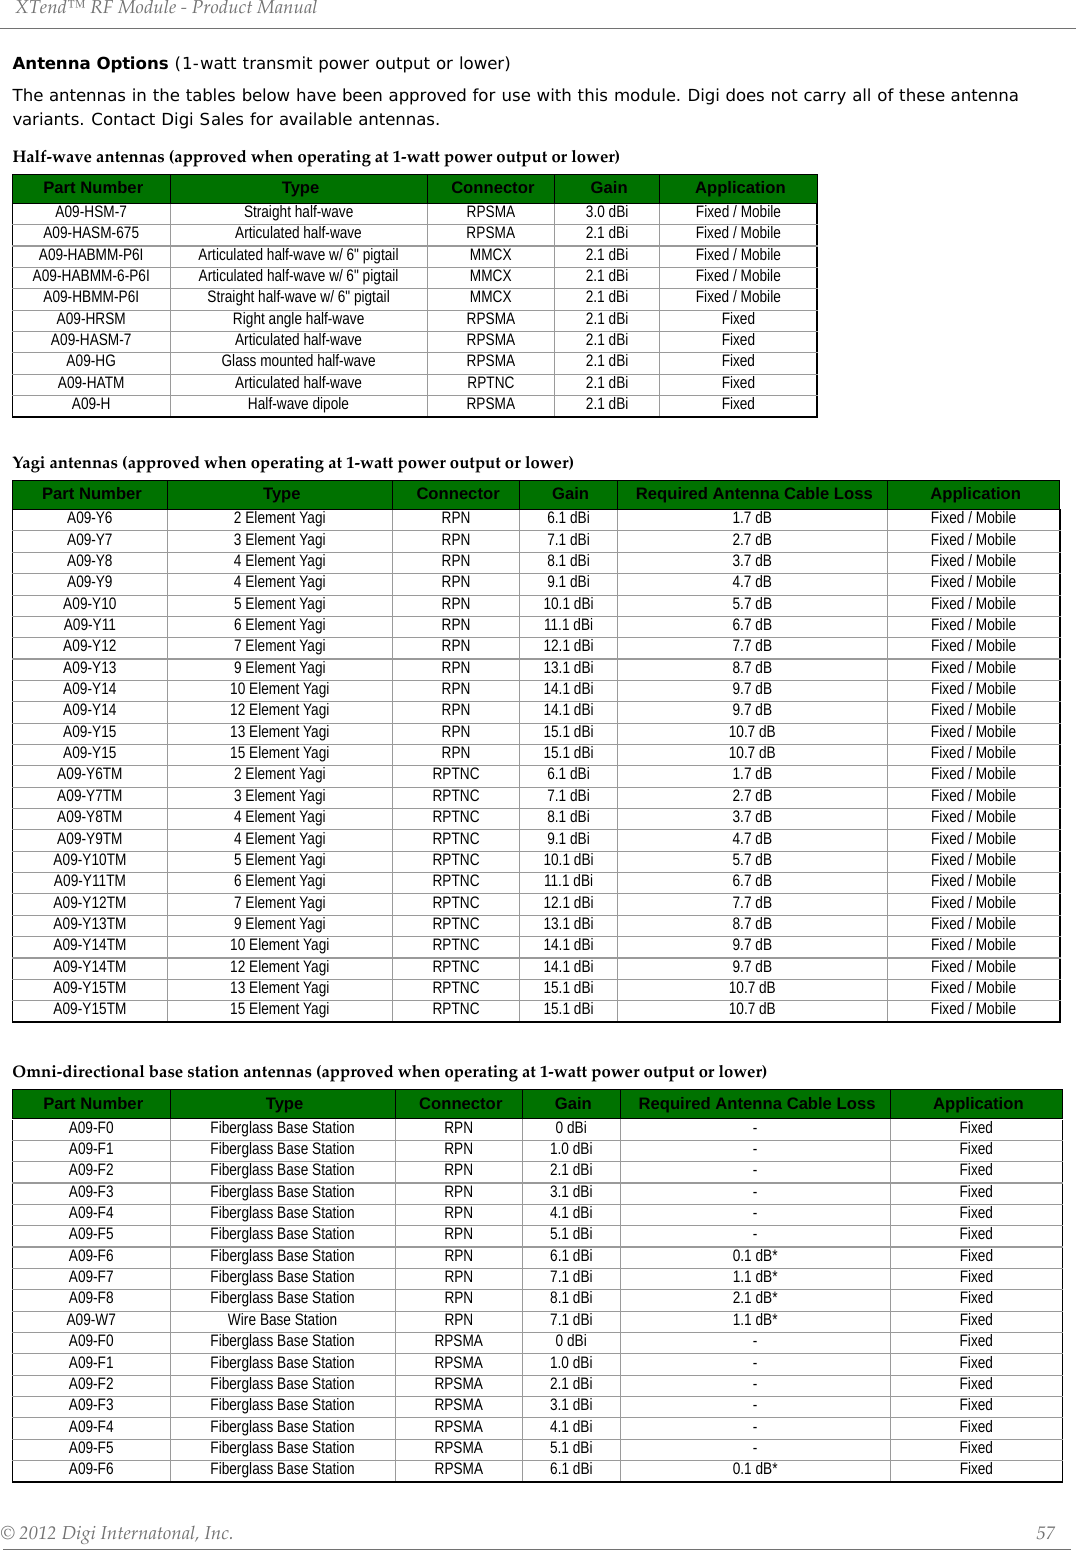 XTend™ RF Module - Product Manual © 2012 Digi Internatonal, Inc.      57Antenna Options (1-watt transmit power output or lower)The antennas in the tables below have been approved for use with this module. Digi does not carry all of these antenna variants. Contact Digi Sales for available antennas. Half-wave antennas (approved when operating at 1-watt power output or lower)Part Number Type Connector Gain ApplicationA09-HSM-7 Straight half-wave RPSMA 3.0 dBi Fixed / MobileA09-HASM-675 Articulated half-wave RPSMA 2.1 dBi Fixed / MobileA09-HABMM-P6I Articulated half-wave w/ 6&quot; pigtail MMCX 2.1 dBi Fixed / MobileA09-HABMM-6-P6I Articulated half-wave w/ 6&quot; pigtail MMCX 2.1 dBi Fixed / MobileA09-HBMM-P6I Straight half-wave w/ 6&quot; pigtail MMCX 2.1 dBi Fixed / MobileA09-HRSM Right angle half-wave RPSMA 2.1 dBi FixedA09-HASM-7 Articulated half-wave RPSMA 2.1 dBi FixedA09-HG Glass mounted half-wave RPSMA 2.1 dBi FixedA09-HATM Articulated half-wave RPTNC 2.1 dBi FixedA09-H Half-wave dipole RPSMA 2.1 dBi FixedYagi antennas (approved when operating at 1-watt power output or lower)Part Number Type Connector Gain Required Antenna Cable Loss ApplicationA09-Y6 2 Element Yagi RPN 6.1 dBi 1.7 dB Fixed / MobileA09-Y7 3 Element Yagi RPN 7.1 dBi 2.7 dB Fixed / MobileA09-Y8 4 Element Yagi RPN 8.1 dBi 3.7 dB Fixed / MobileA09-Y9 4 Element Yagi RPN 9.1 dBi 4.7 dB Fixed / MobileA09-Y10 5 Element Yagi RPN 10.1 dBi 5.7 dB Fixed / MobileA09-Y11 6 Element Yagi RPN 11.1 dBi 6.7 dB Fixed / MobileA09-Y12 7 Element Yagi RPN 12.1 dBi 7.7 dB Fixed / MobileA09-Y13 9 Element Yagi RPN 13.1 dBi 8.7 dB Fixed / MobileA09-Y14 10 Element Yagi RPN 14.1 dBi 9.7 dB Fixed / MobileA09-Y14 12 Element Yagi RPN 14.1 dBi 9.7 dB Fixed / MobileA09-Y15 13 Element Yagi RPN 15.1 dBi 10.7 dB Fixed / MobileA09-Y15 15 Element Yagi RPN 15.1 dBi 10.7 dB Fixed / MobileA09-Y6TM 2 Element Yagi RPTNC 6.1 dBi 1.7 dB Fixed / MobileA09-Y7TM 3 Element Yagi RPTNC 7.1 dBi 2.7 dB Fixed / MobileA09-Y8TM 4 Element Yagi RPTNC 8.1 dBi 3.7 dB Fixed / MobileA09-Y9TM 4 Element Yagi RPTNC 9.1 dBi 4.7 dB Fixed / MobileA09-Y10TM 5 Element Yagi RPTNC 10.1 dBi 5.7 dB Fixed / MobileA09-Y11TM 6 Element Yagi RPTNC 11.1 dBi 6.7 dB Fixed / MobileA09-Y12TM 7 Element Yagi RPTNC 12.1 dBi 7.7 dB Fixed / MobileA09-Y13TM 9 Element Yagi RPTNC 13.1 dBi 8.7 dB Fixed / MobileA09-Y14TM 10 Element Yagi RPTNC 14.1 dBi 9.7 dB Fixed / MobileA09-Y14TM 12 Element Yagi RPTNC 14.1 dBi 9.7 dB Fixed / MobileA09-Y15TM 13 Element Yagi RPTNC 15.1 dBi 10.7 dB Fixed / MobileA09-Y15TM 15 Element Yagi RPTNC 15.1 dBi 10.7 dB Fixed / MobileOmni-directional base station antennas (approved when operating at 1-watt power output or lower)Part Number Type Connector Gain Required Antenna Cable Loss ApplicationA09-F0 Fiberglass Base Station RPN 0 dBi - FixedA09-F1 Fiberglass Base Station RPN 1.0 dBi - FixedA09-F2 Fiberglass Base Station RPN 2.1 dBi - FixedA09-F3 Fiberglass Base Station RPN 3.1 dBi - FixedA09-F4 Fiberglass Base Station RPN 4.1 dBi - FixedA09-F5 Fiberglass Base Station RPN 5.1 dBi - FixedA09-F6 Fiberglass Base Station RPN 6.1 dBi 0.1 dB* FixedA09-F7 Fiberglass Base Station RPN 7.1 dBi 1.1 dB* FixedA09-F8 Fiberglass Base Station RPN 8.1 dBi 2.1 dB* FixedA09-W7 Wire Base Station RPN 7.1 dBi 1.1 dB* FixedA09-F0 Fiberglass Base Station RPSMA 0 dBi - FixedA09-F1 Fiberglass Base Station RPSMA 1.0 dBi - FixedA09-F2 Fiberglass Base Station RPSMA 2.1 dBi - FixedA09-F3 Fiberglass Base Station RPSMA 3.1 dBi - FixedA09-F4 Fiberglass Base Station RPSMA 4.1 dBi - FixedA09-F5 Fiberglass Base Station RPSMA 5.1 dBi - FixedA09-F6 Fiberglass Base Station RPSMA 6.1 dBi 0.1 dB* Fixed